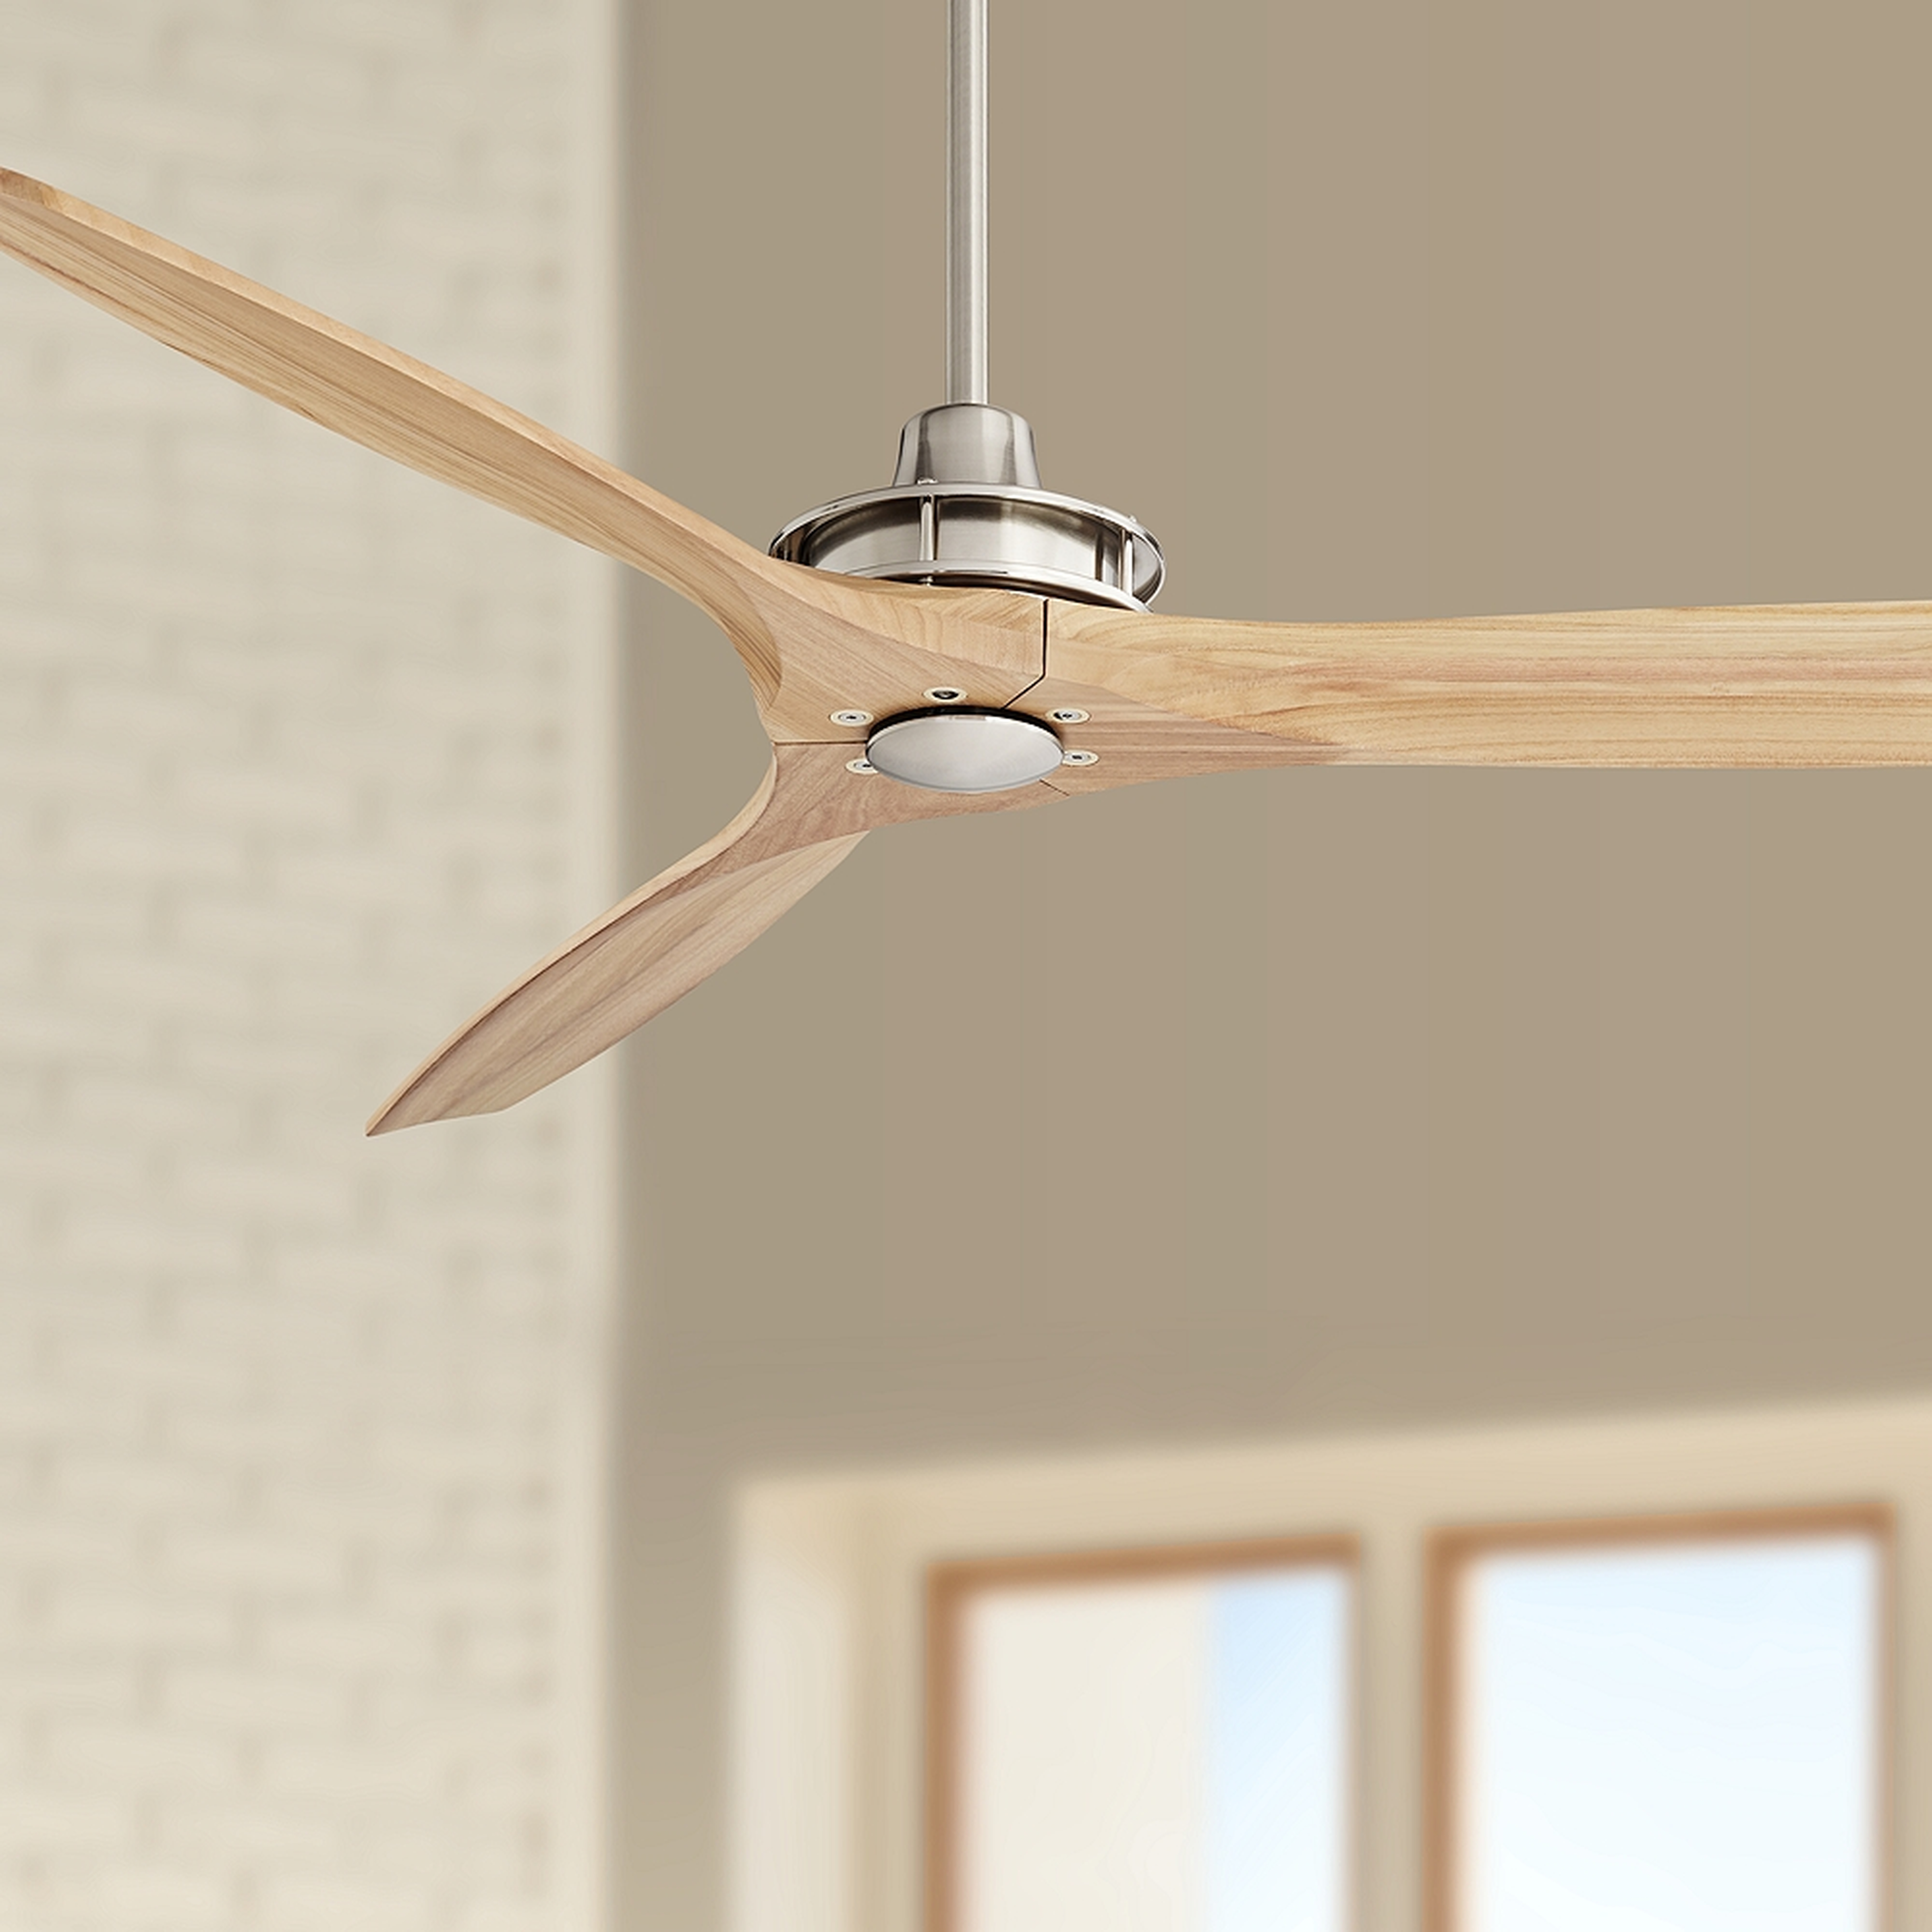 52" Windspun Brushed Nickel and Natural Wood Ceiling Fan - Style # 57J94 - Lamps Plus